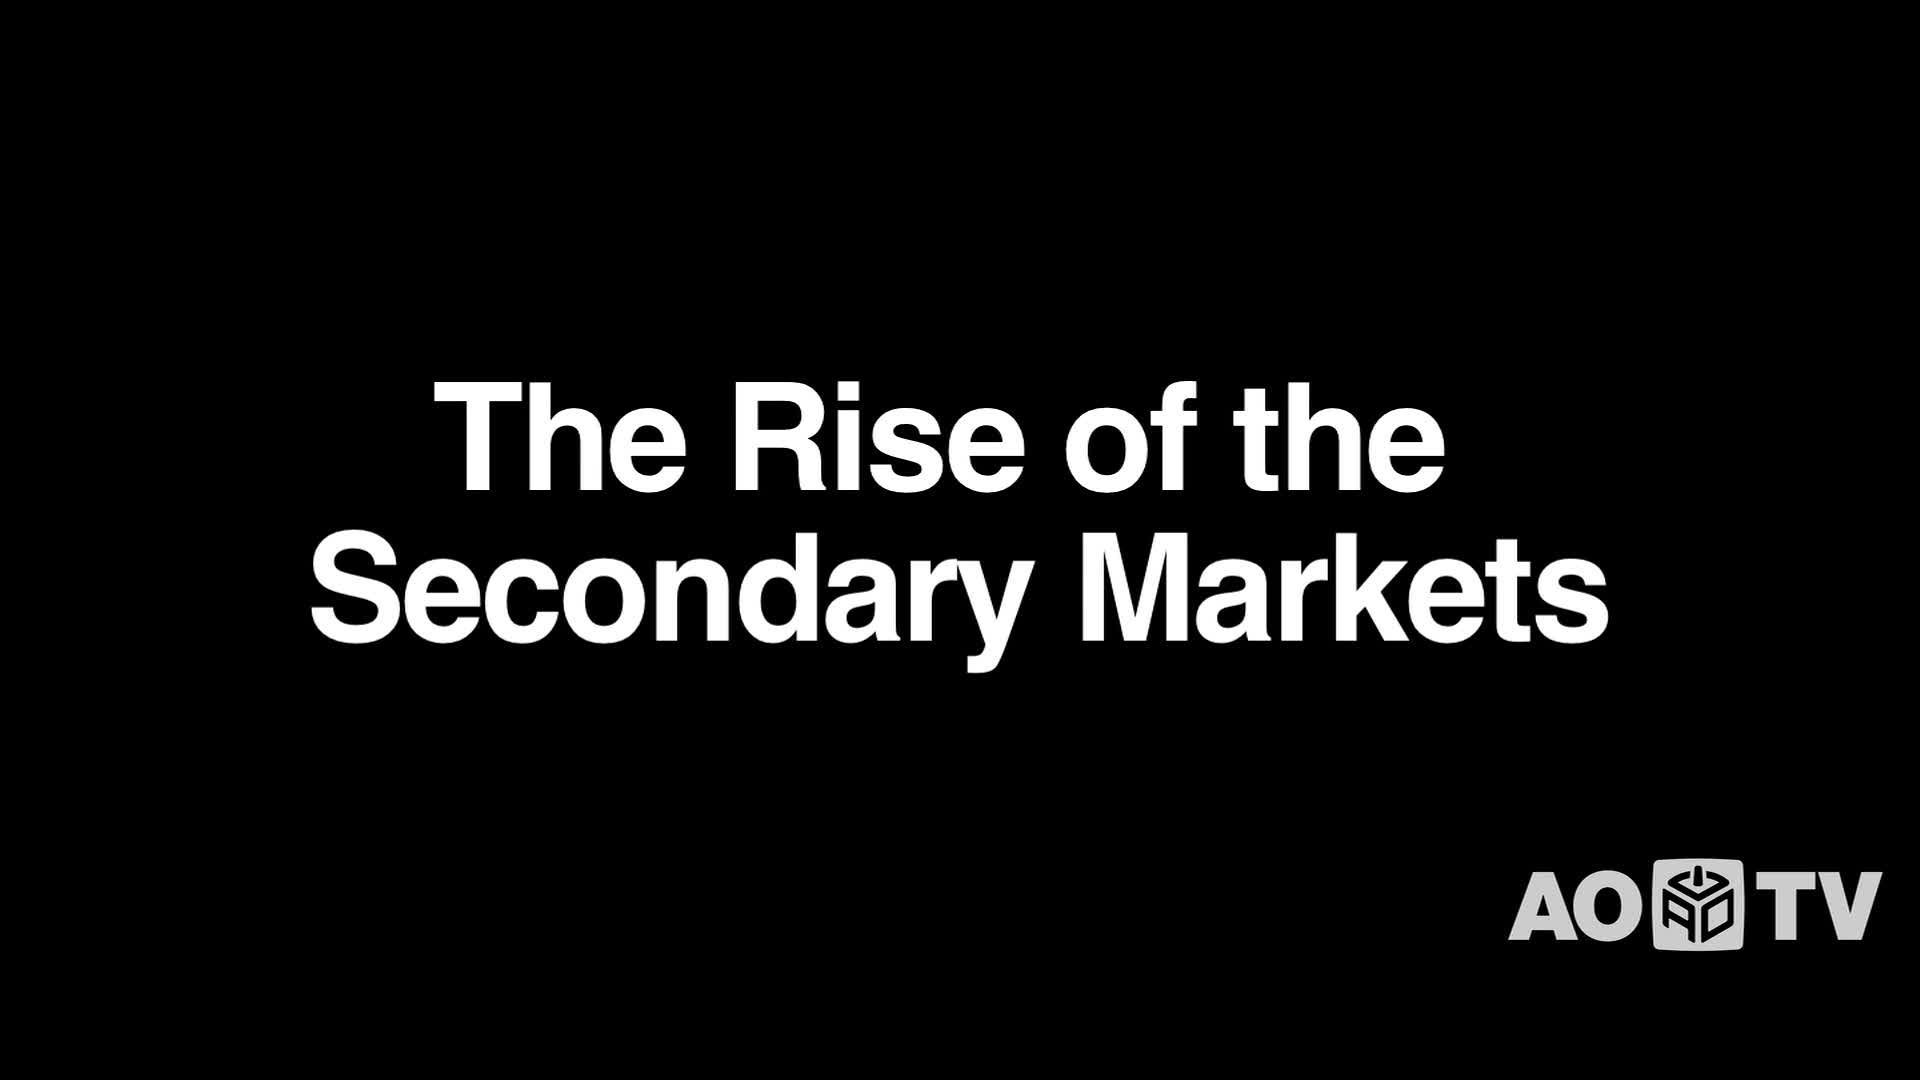 The Rise of the Secondary Markets